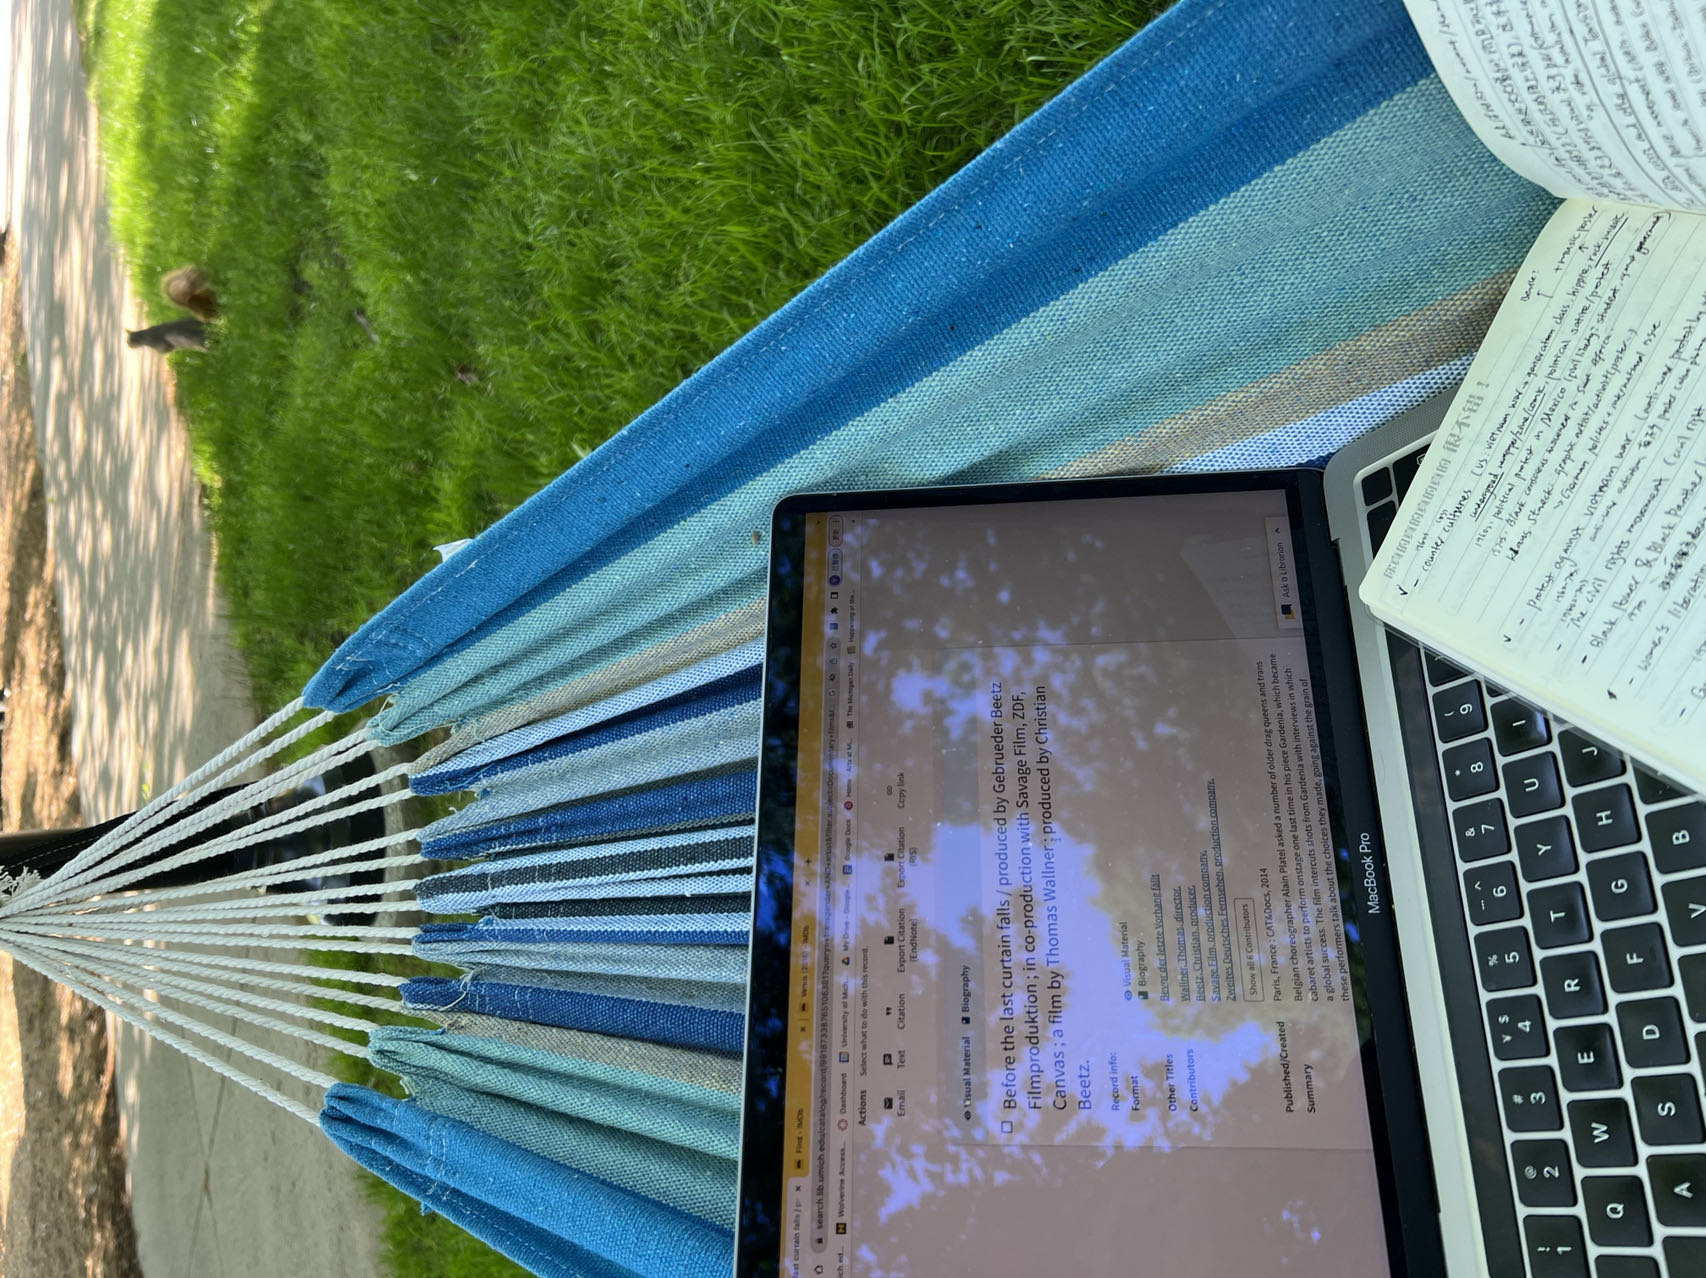 The author's computer and notebook placed on a hammock